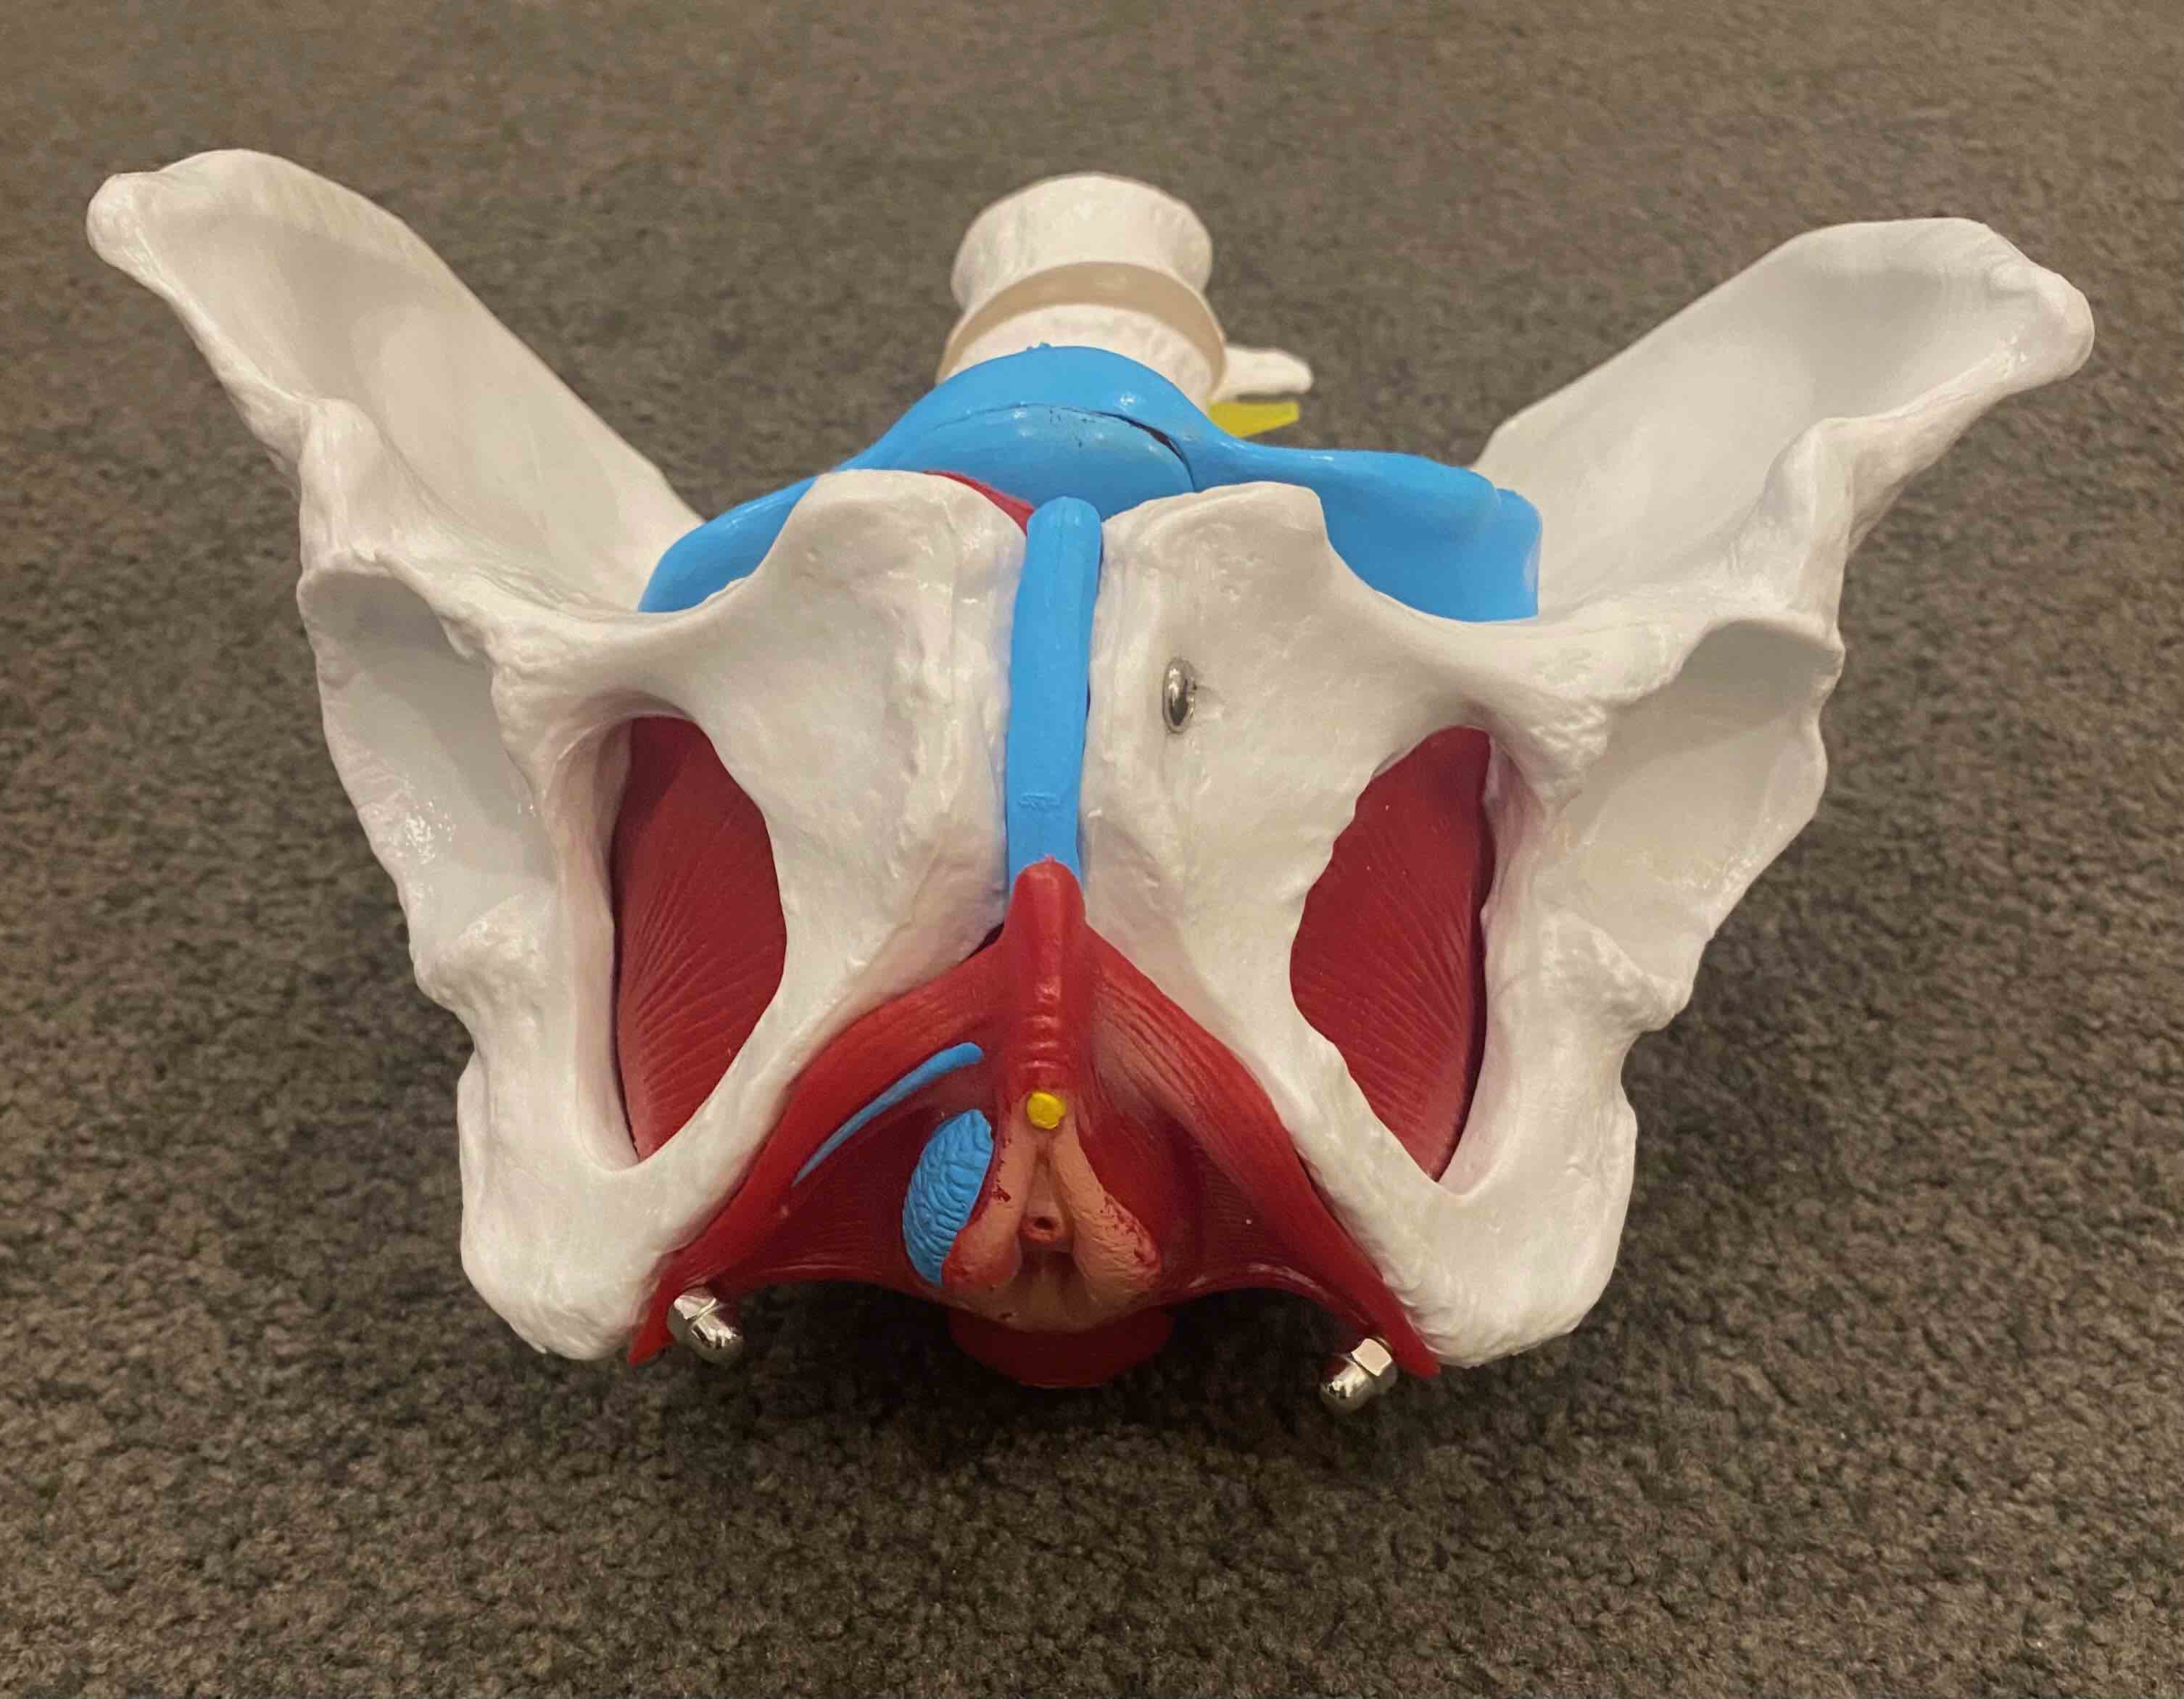 An anatomical model of the pelvis